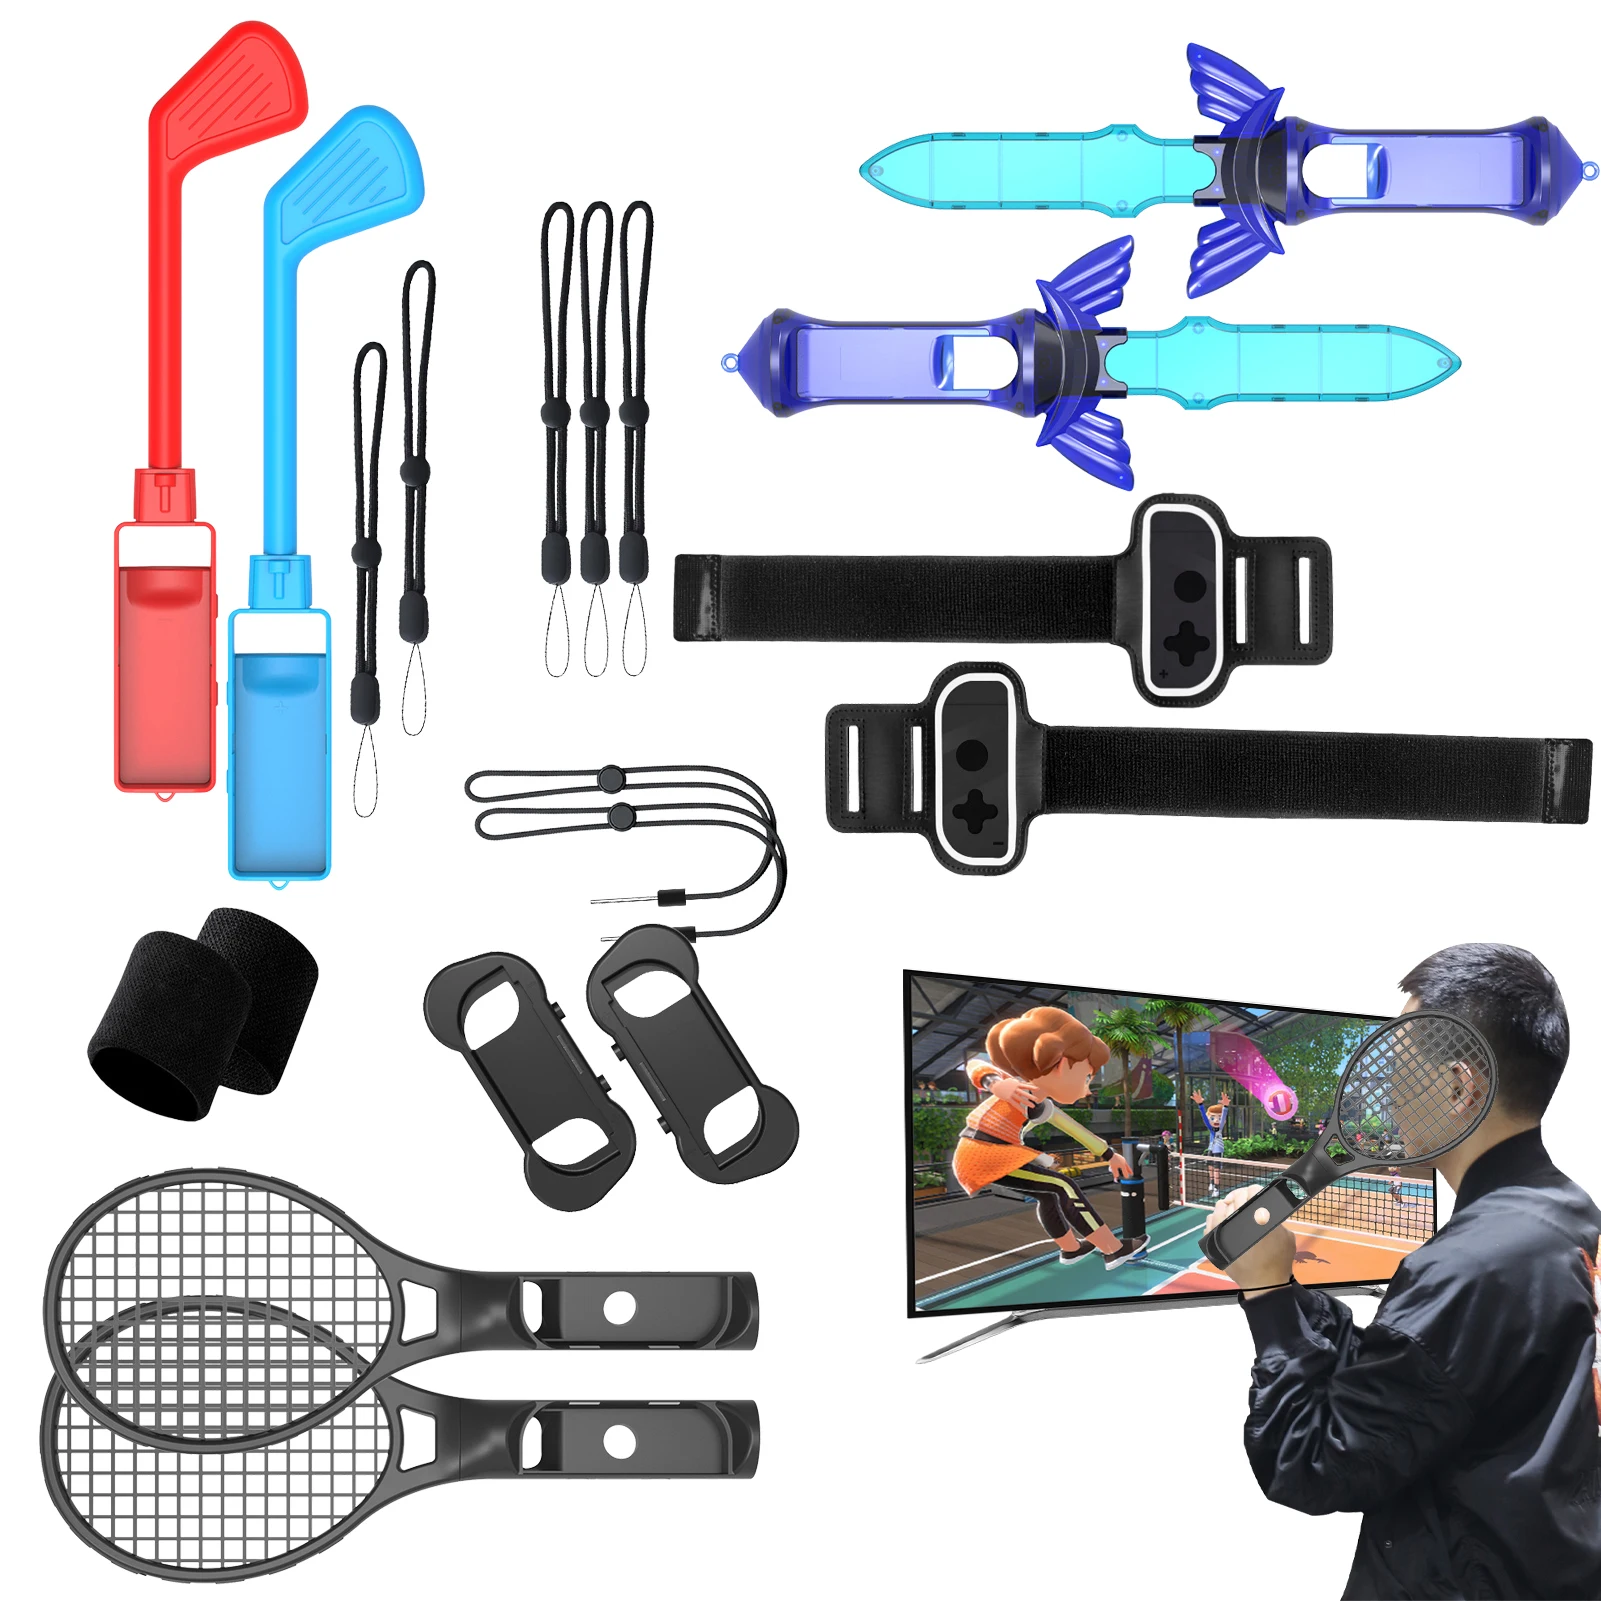 

12 In 1 For NS Switch Sports Control Set Wristband Tennis Racket Leg Strap Somatosensory Game Accessories For Switch OLED Gift